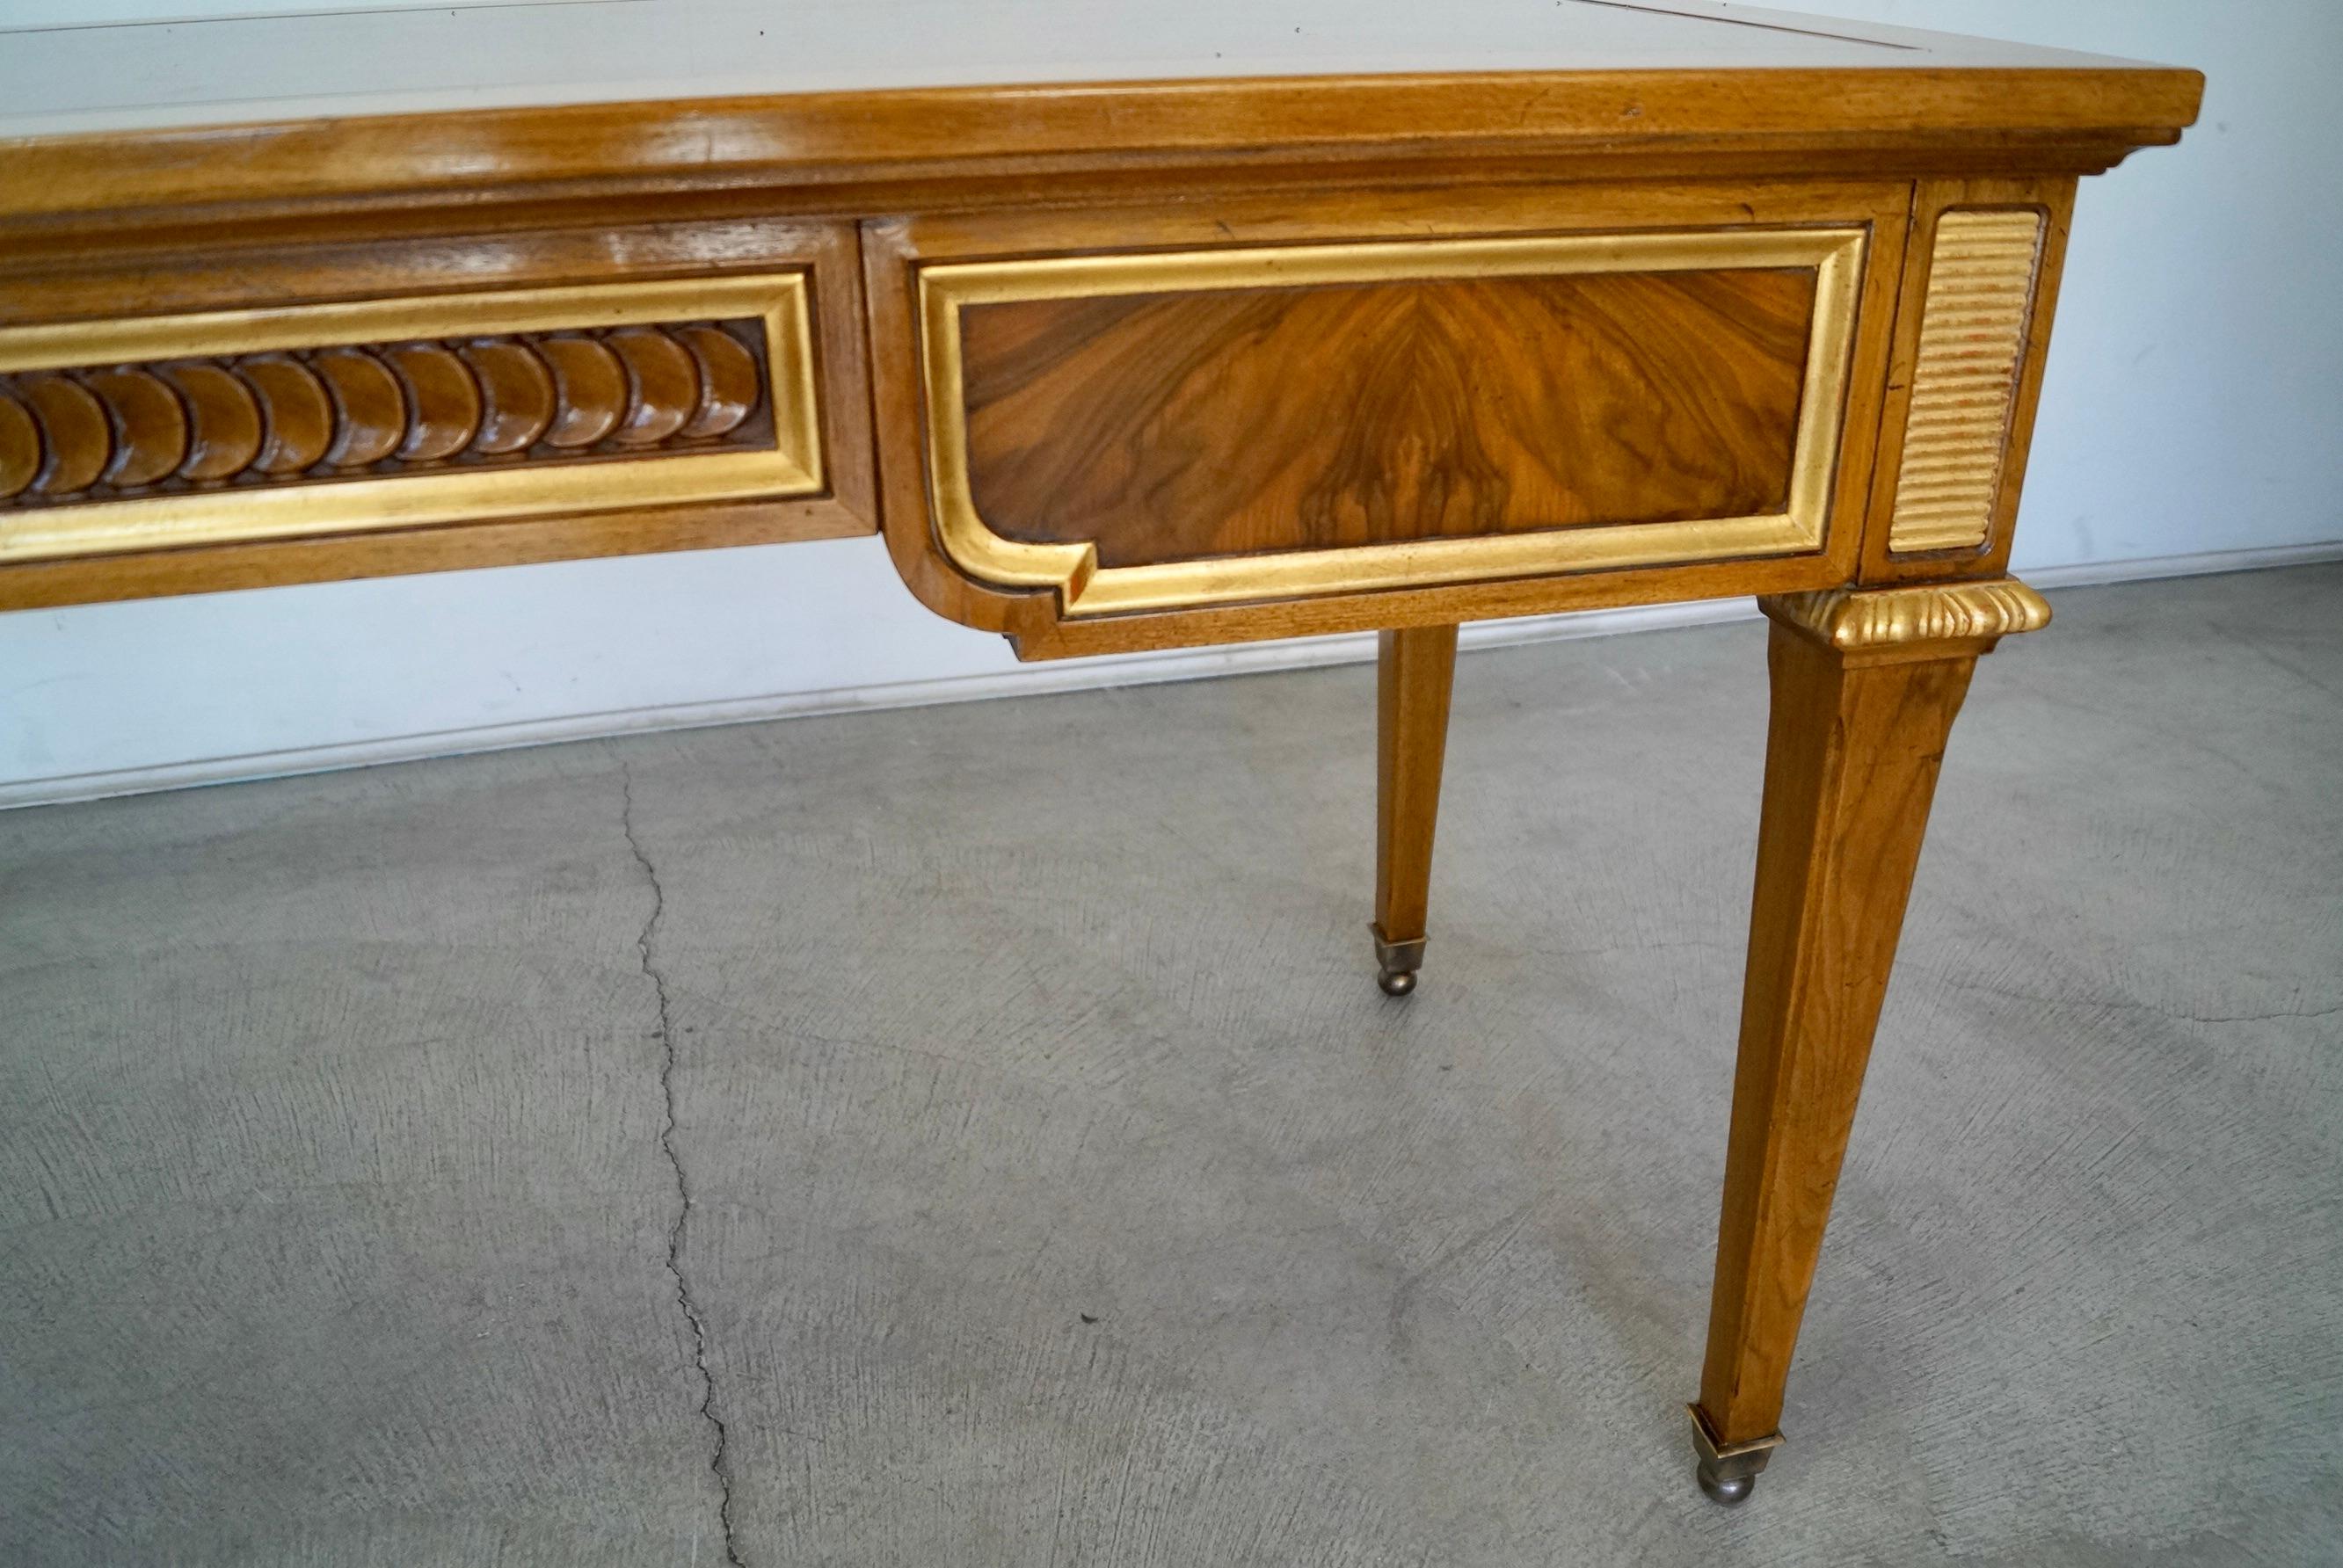 1960s Hollywood Regency Neoclassical Revival Karges Writing Desk For Sale 5